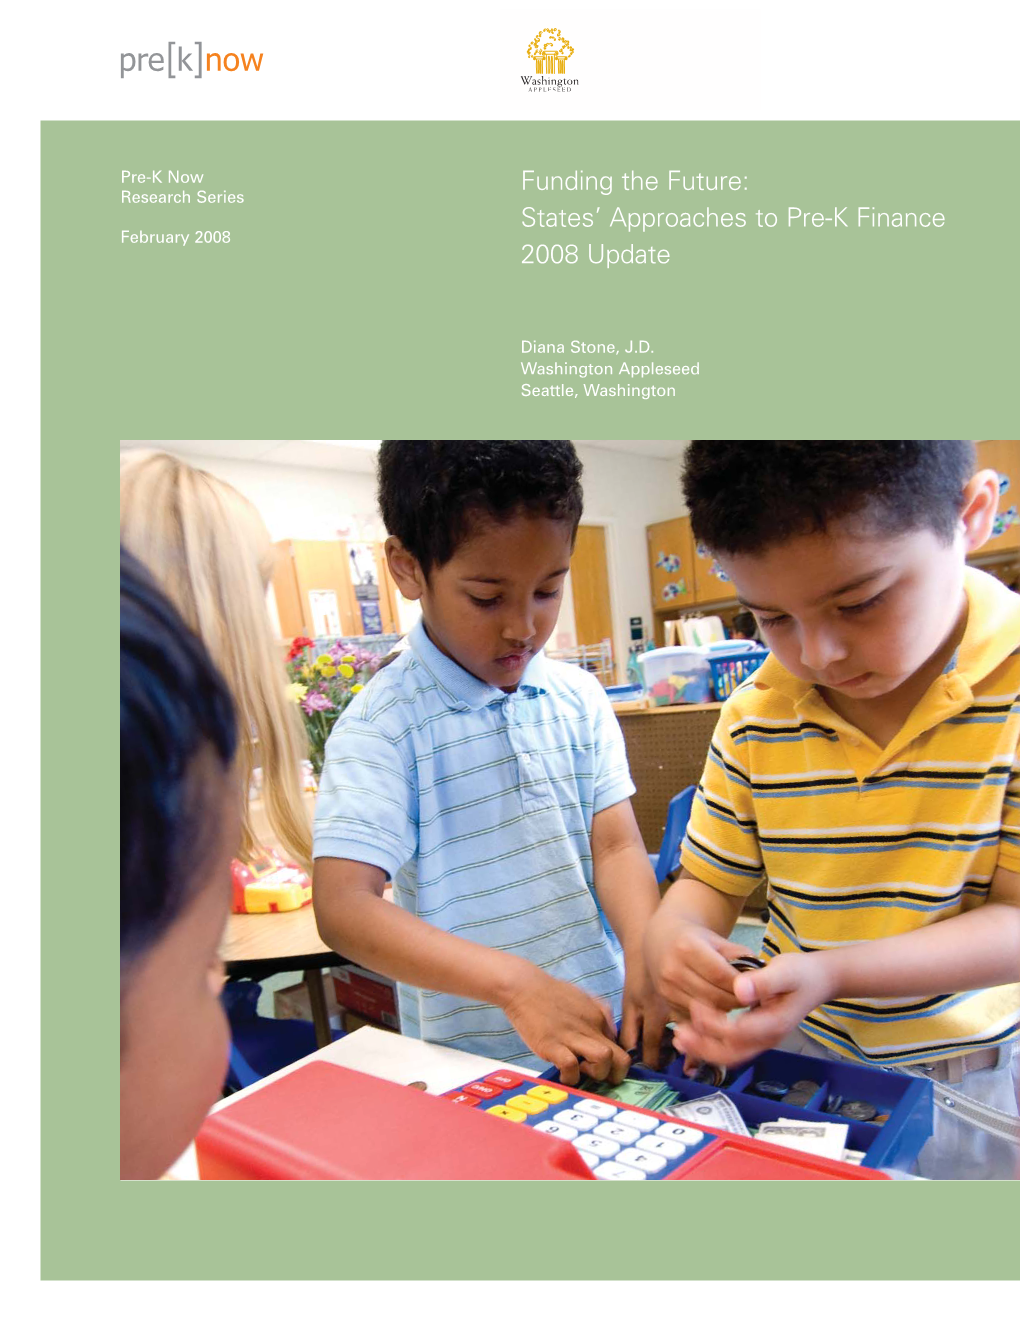 Funding the Future: States' Approaches to Pre-K Finance 2008